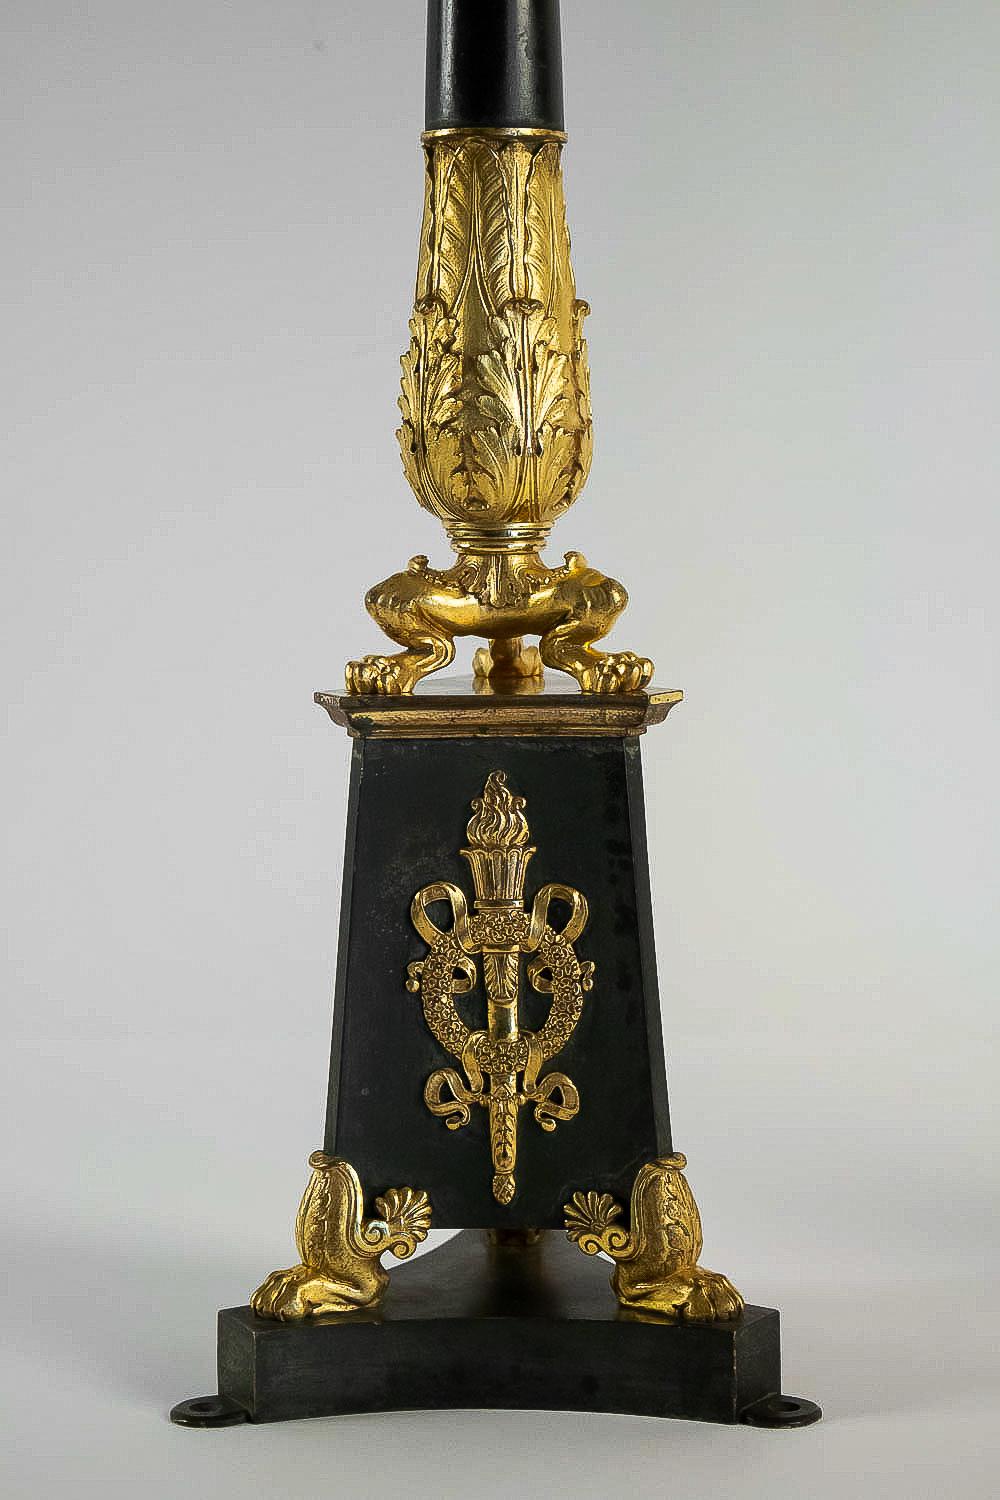 Large Pair of French Empire or Restauration Period Candelabra, circa 1815-1830 For Sale 4